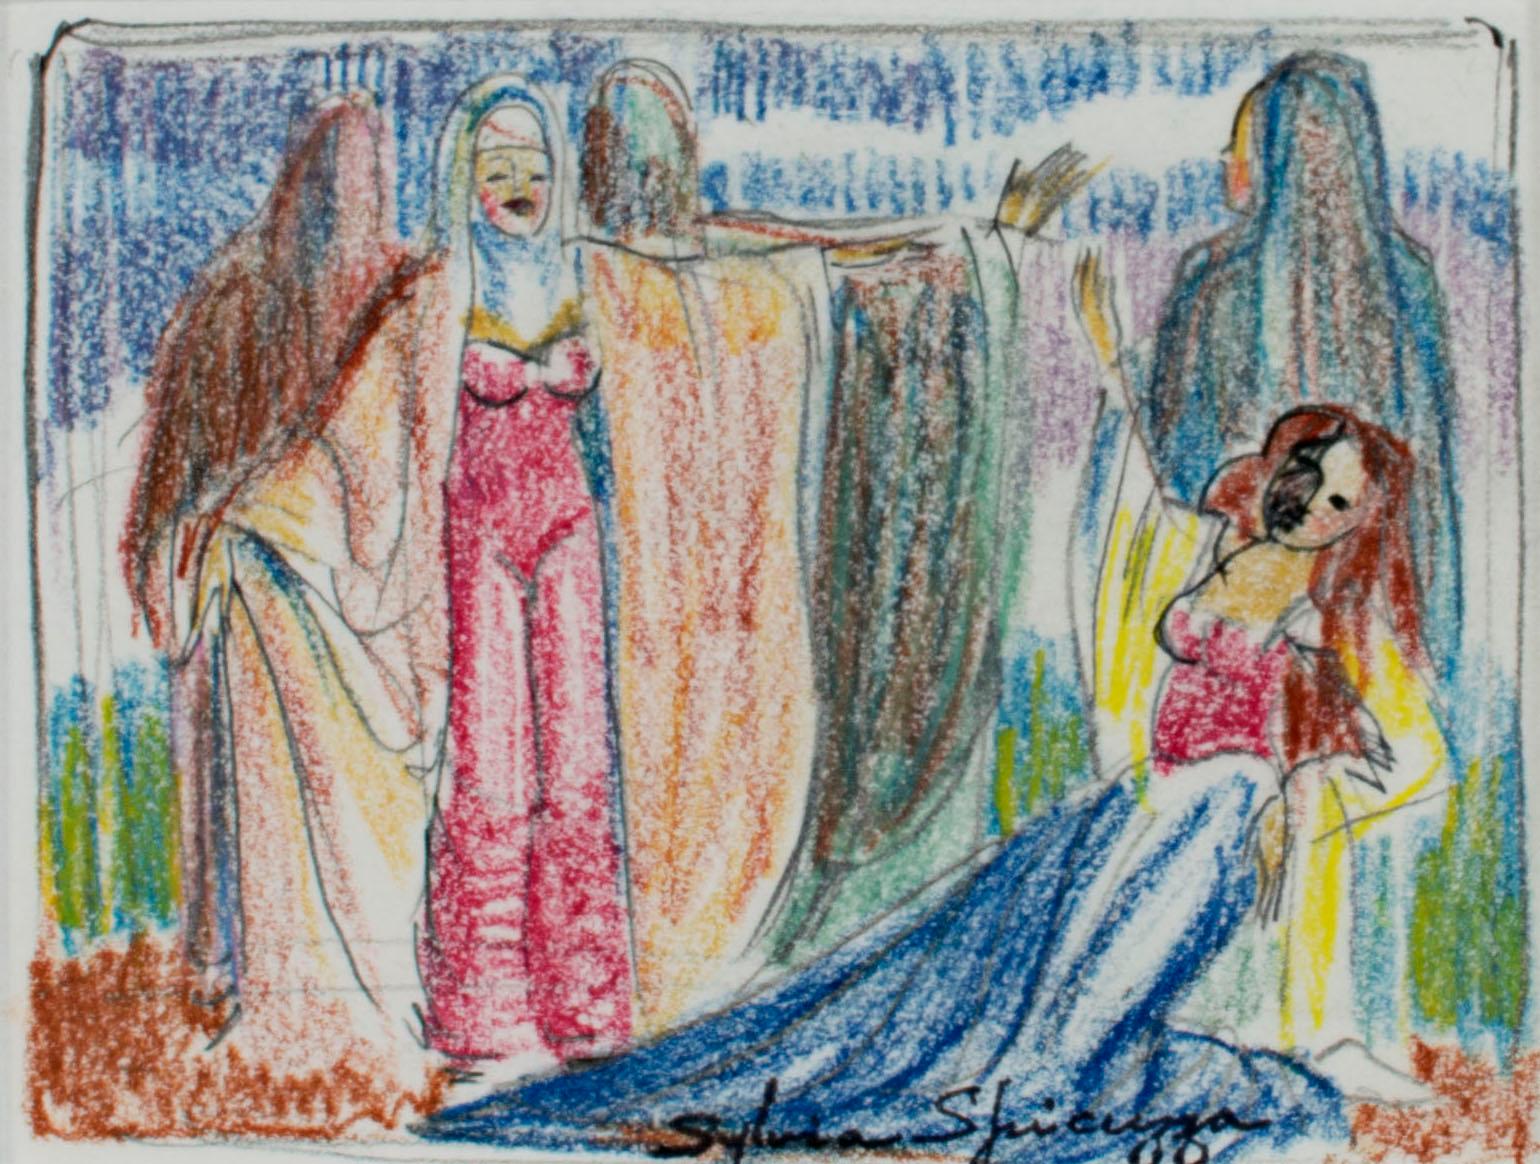 In this drawing, Sylvia Spicuzza presents the viewer with a scene from the theater or opera, showing five women on stage. Three of the women have their backs to the viewer, while one in the foreground casts her arms out over another who has fallen